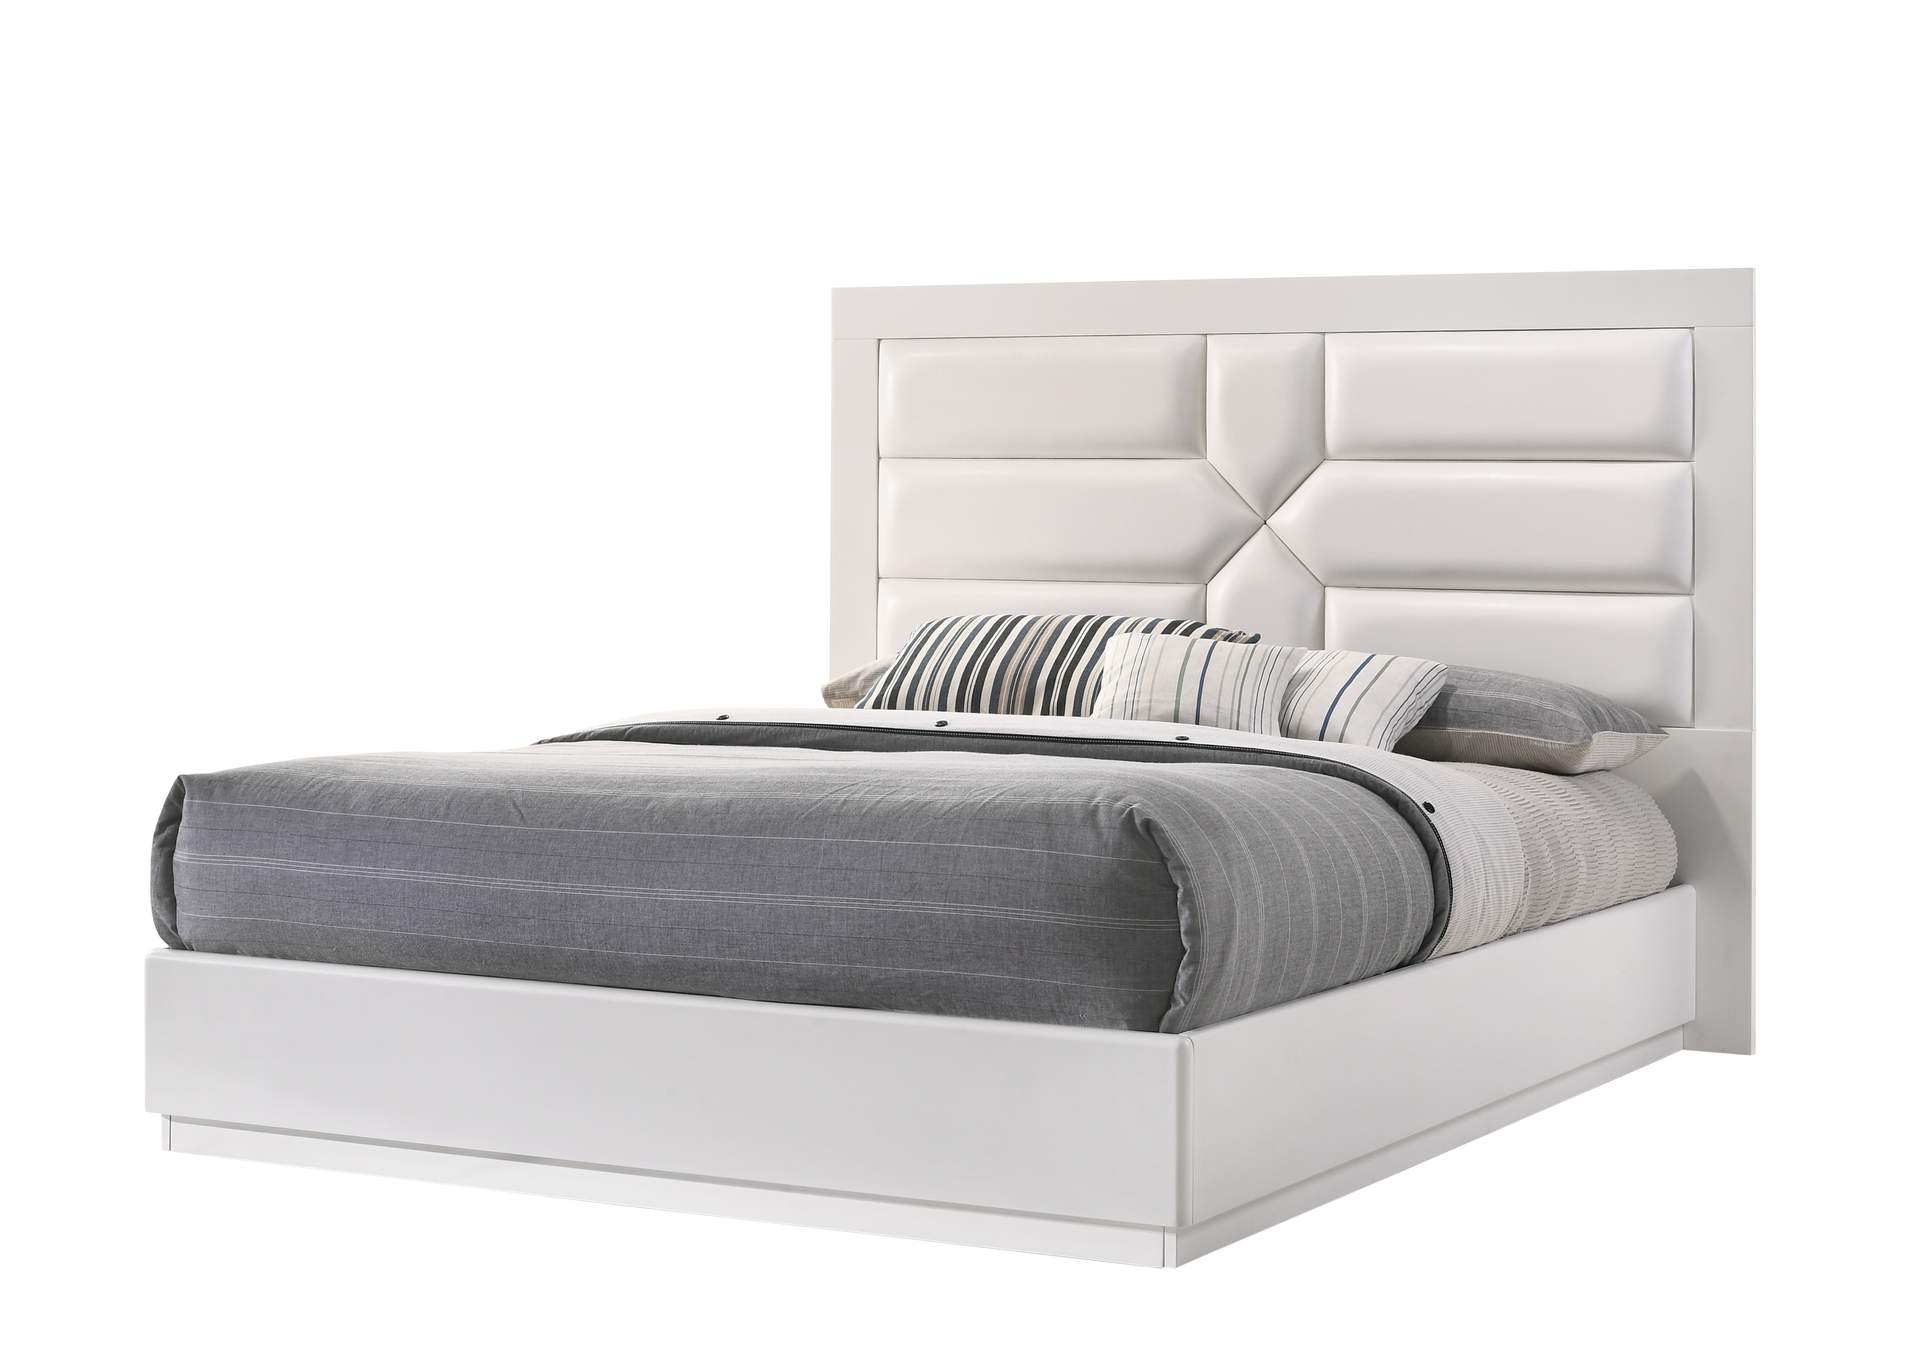 Contemporary Bedroom Set With King Size Bed,Chintaly Imports